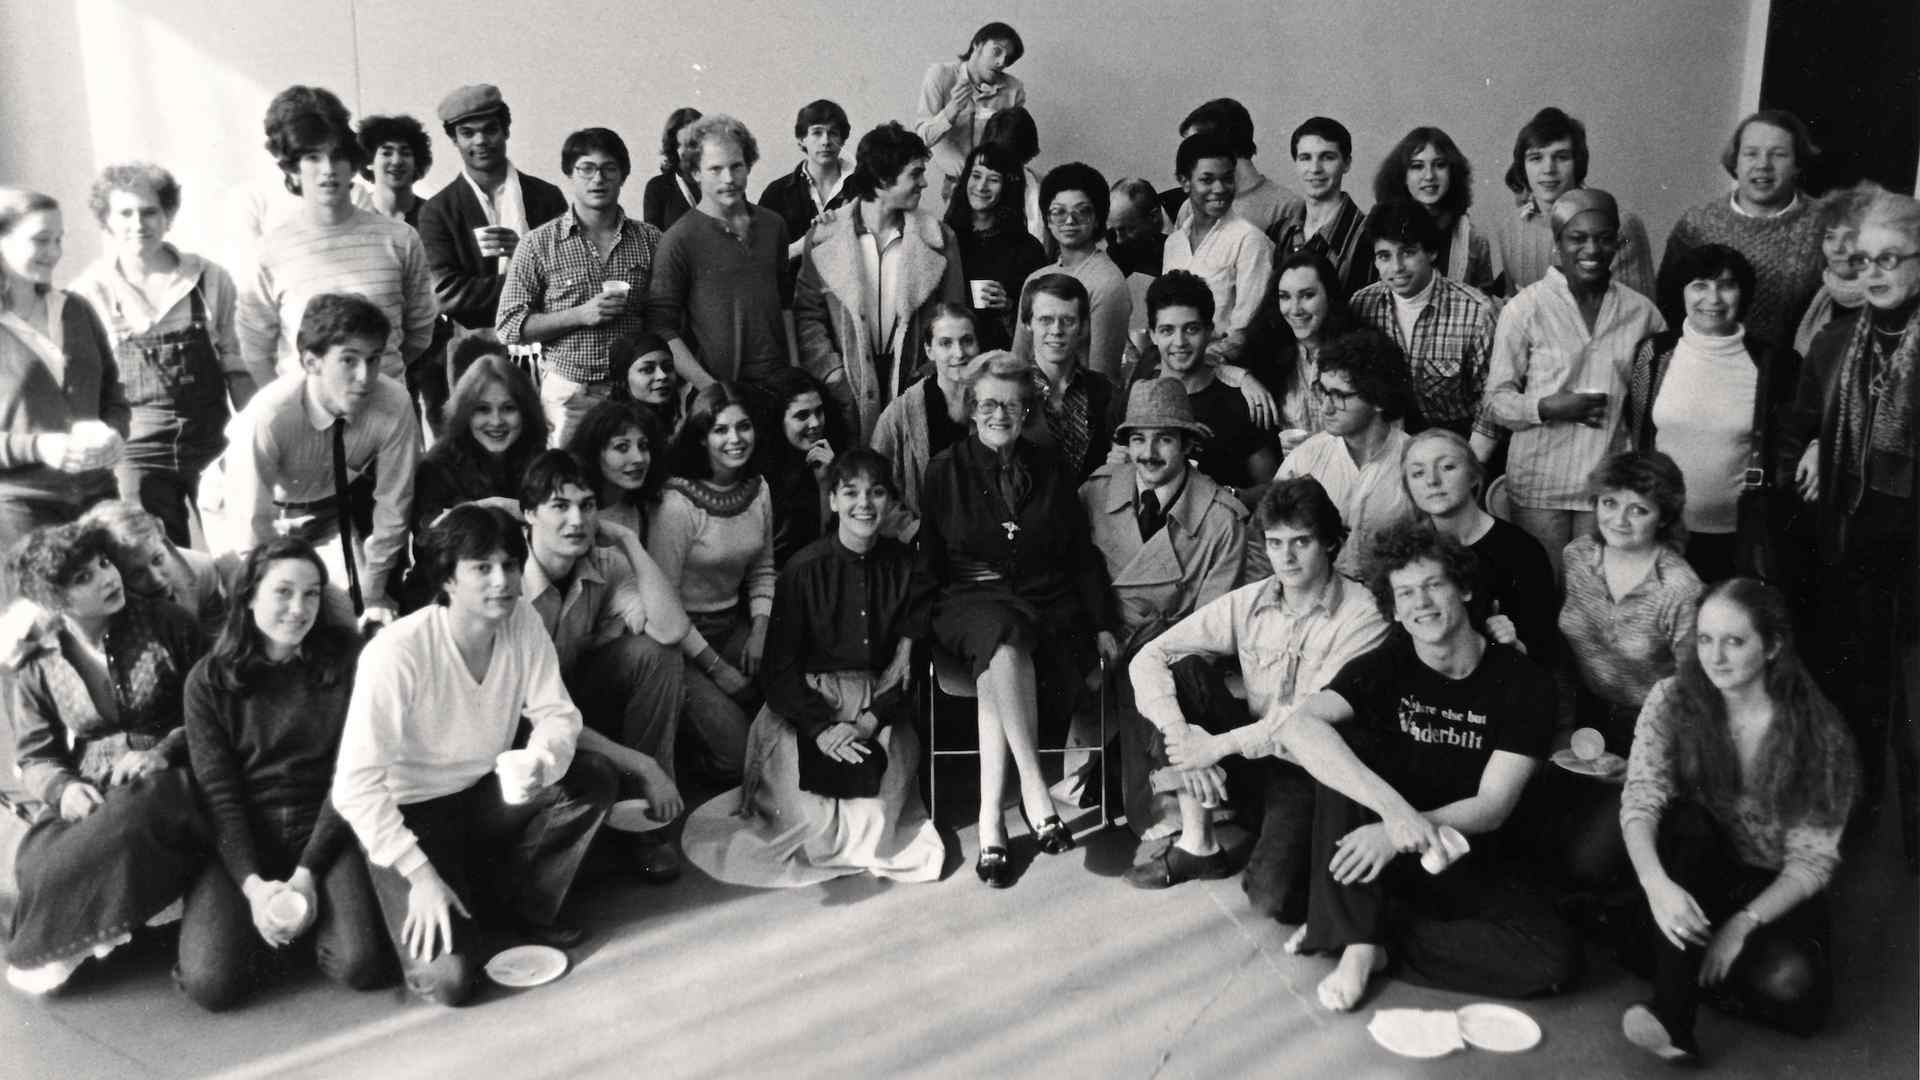 Archival portrait of drama Groups 10, 11, and 12 in black and white